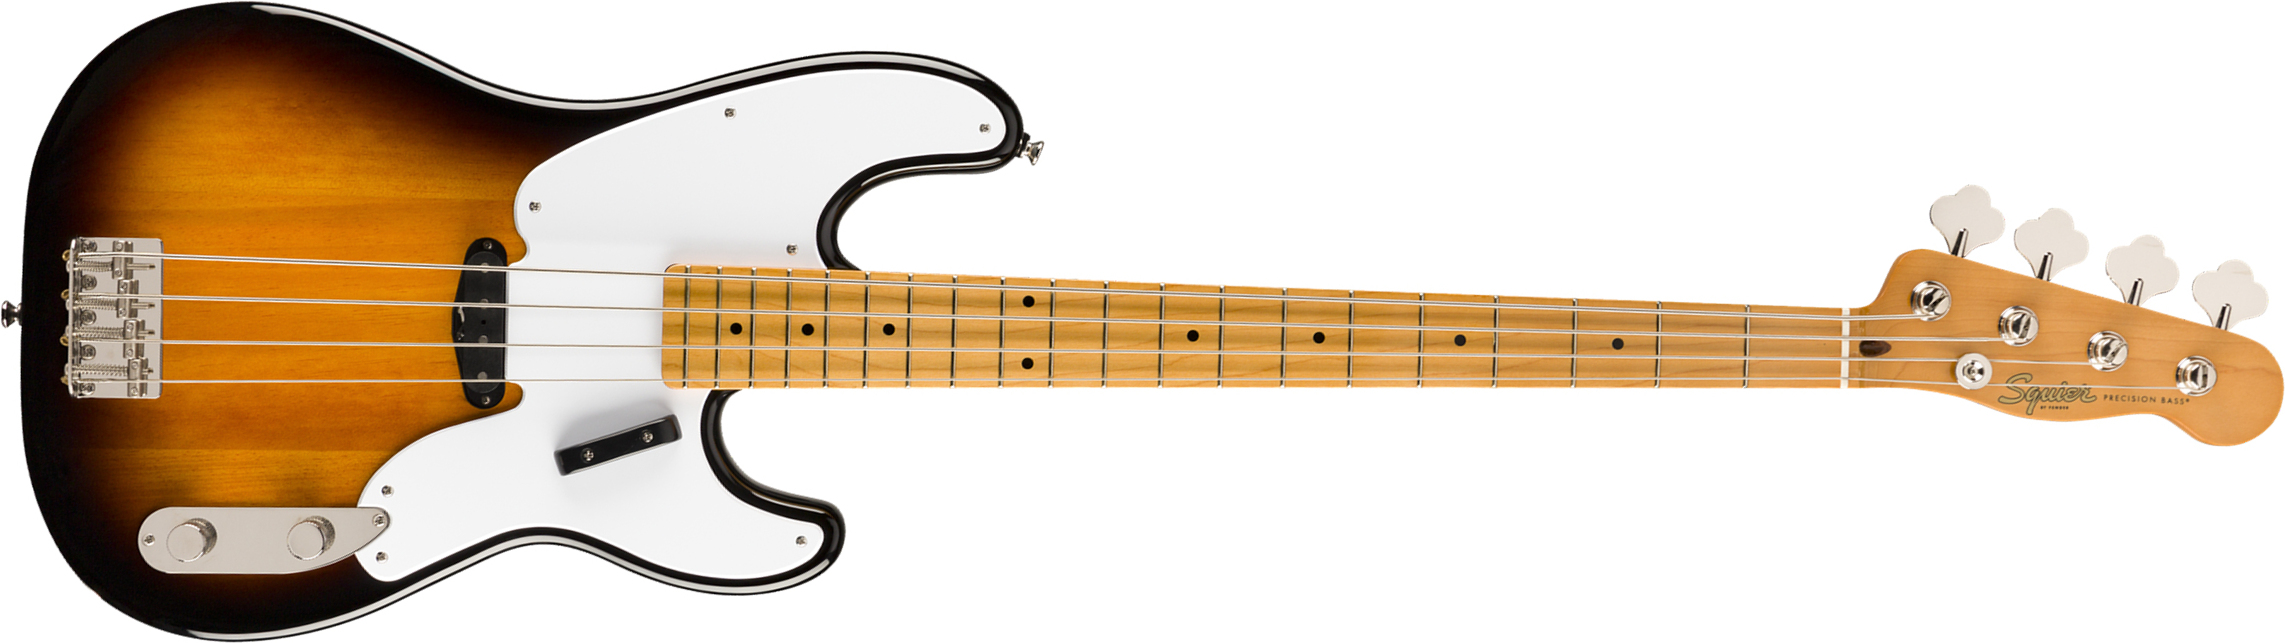 Squier Precision Bass '50s Classic Vibe 2019 Mn - 2-color Sunburst - Solid body electric bass - Main picture